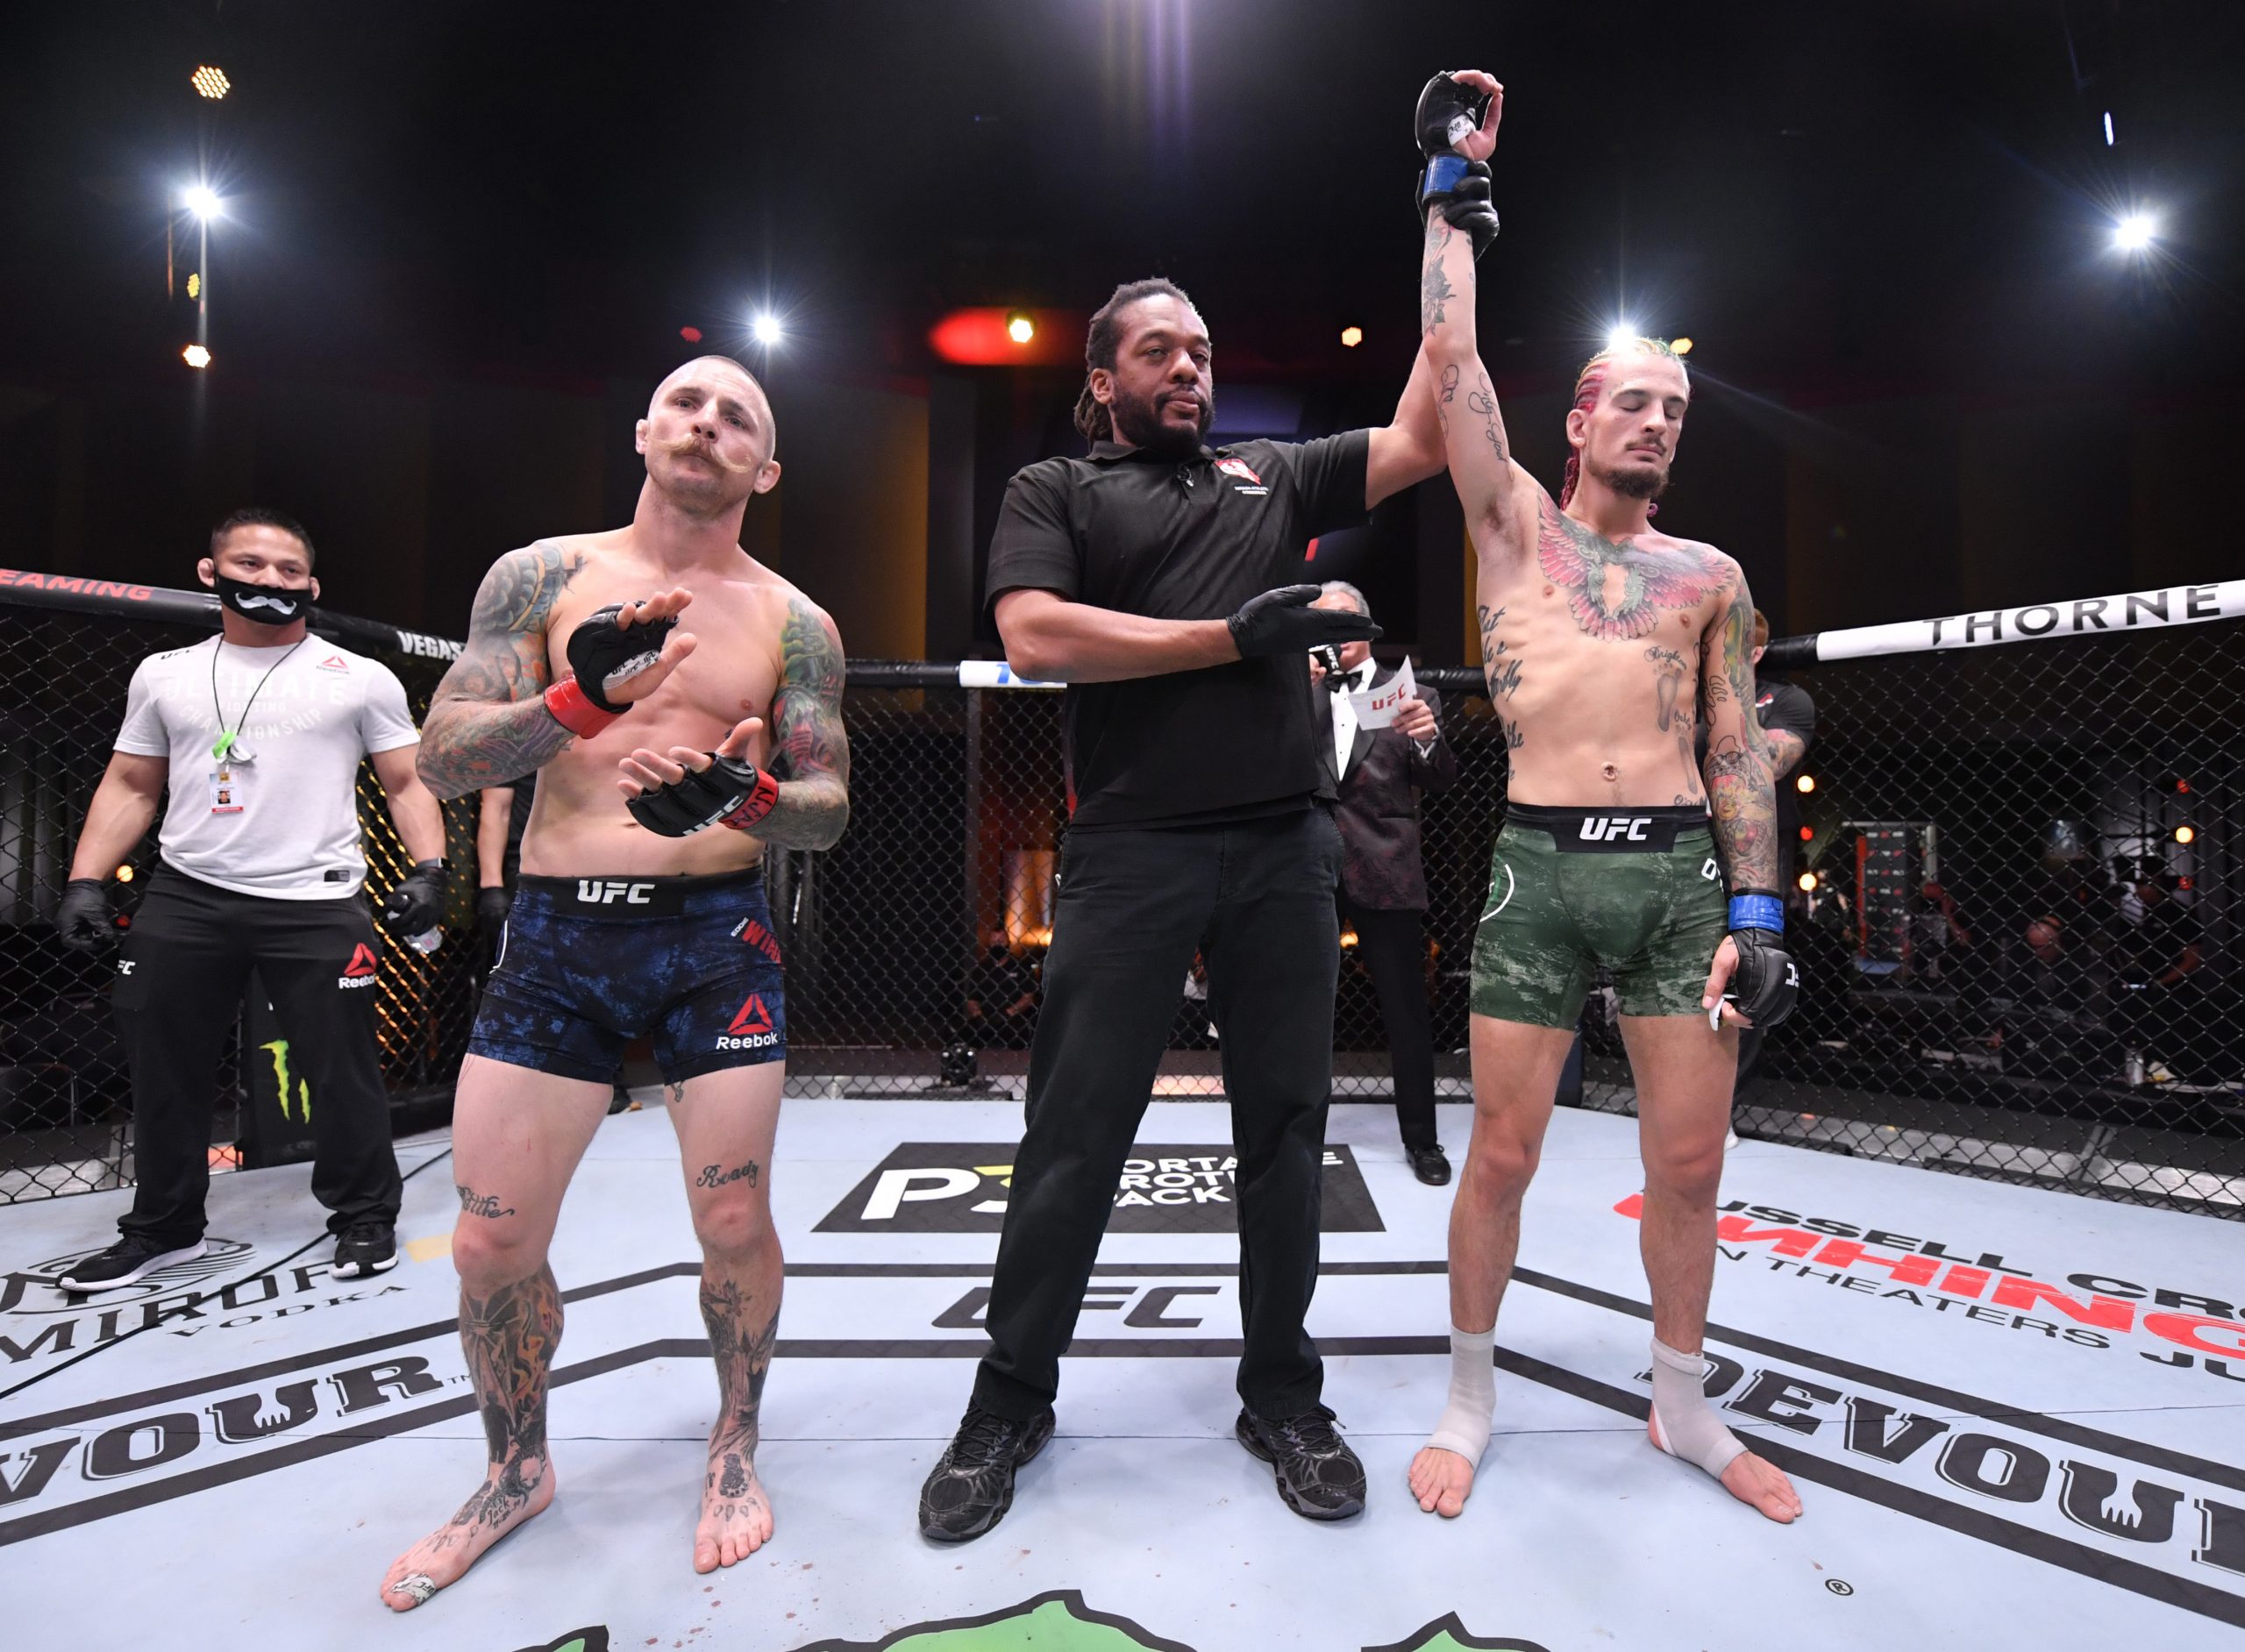 Sean O'Malley is one of the rising stars in the UFC